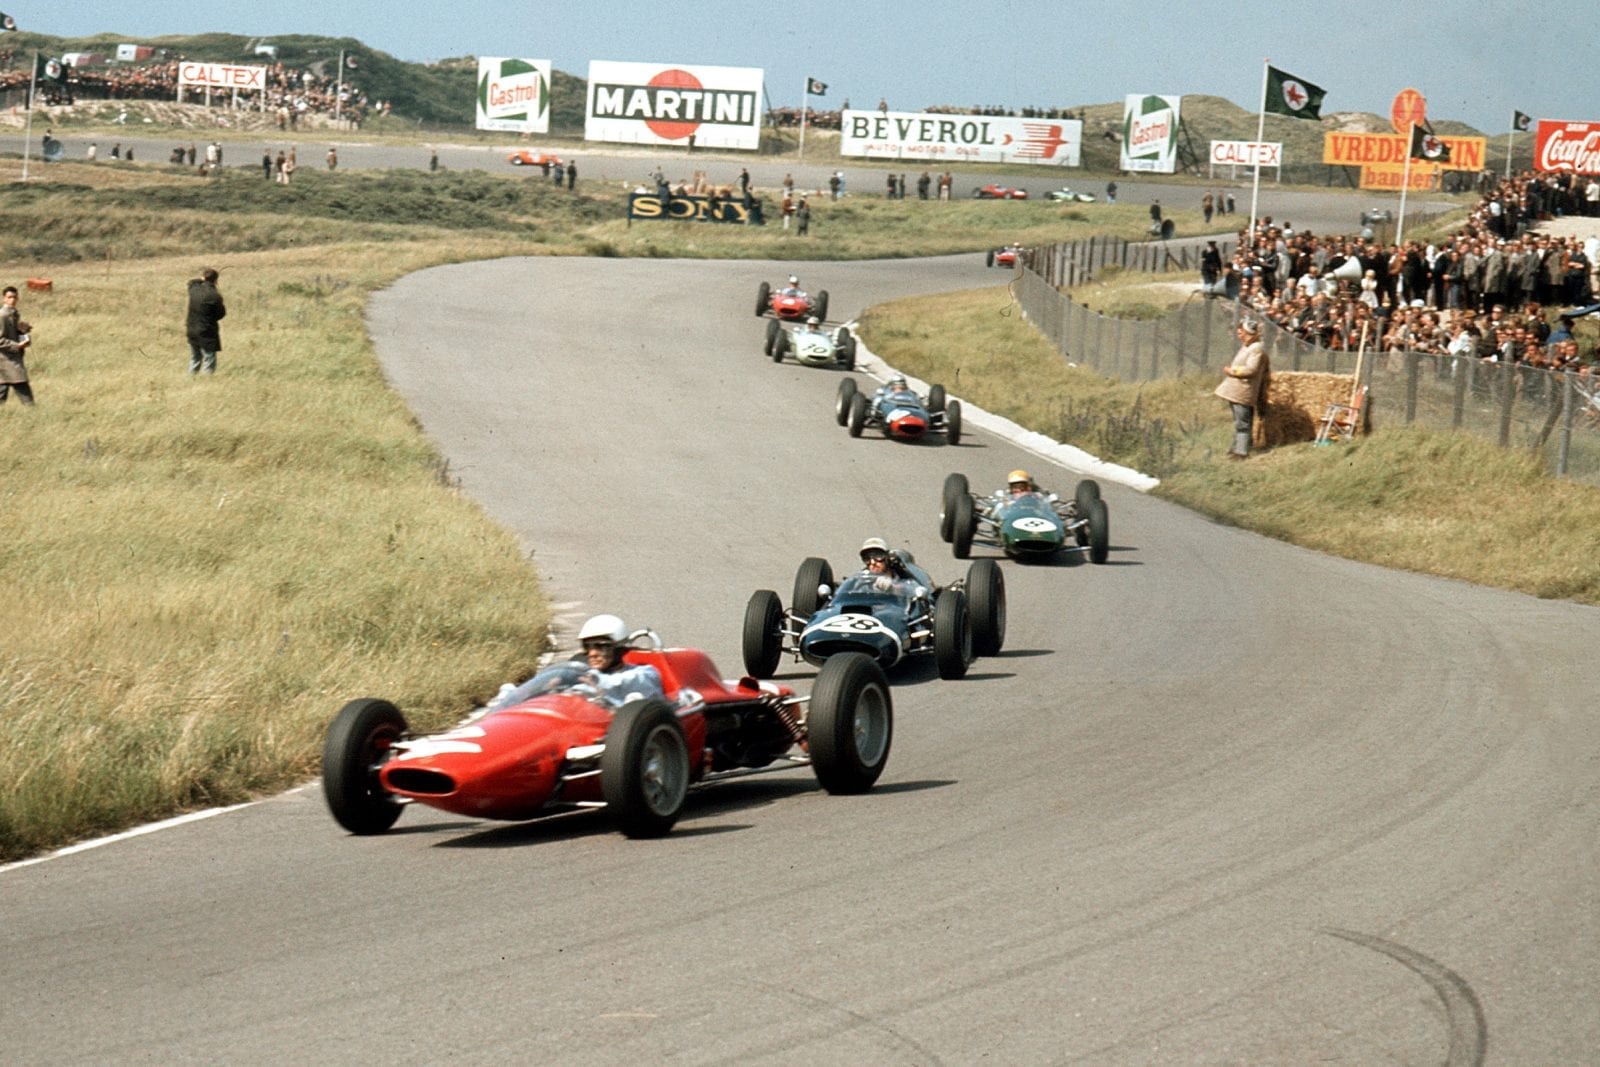 Phil Hill in an ATS 100 leads Jo Bonnier in a Cooper T60 Climax, Trevor Taylor in a Lotus 25 Climax, Chris Amon in a Lola Mk4A Climax and Innes Ireland driving a BRP 1-BRM.